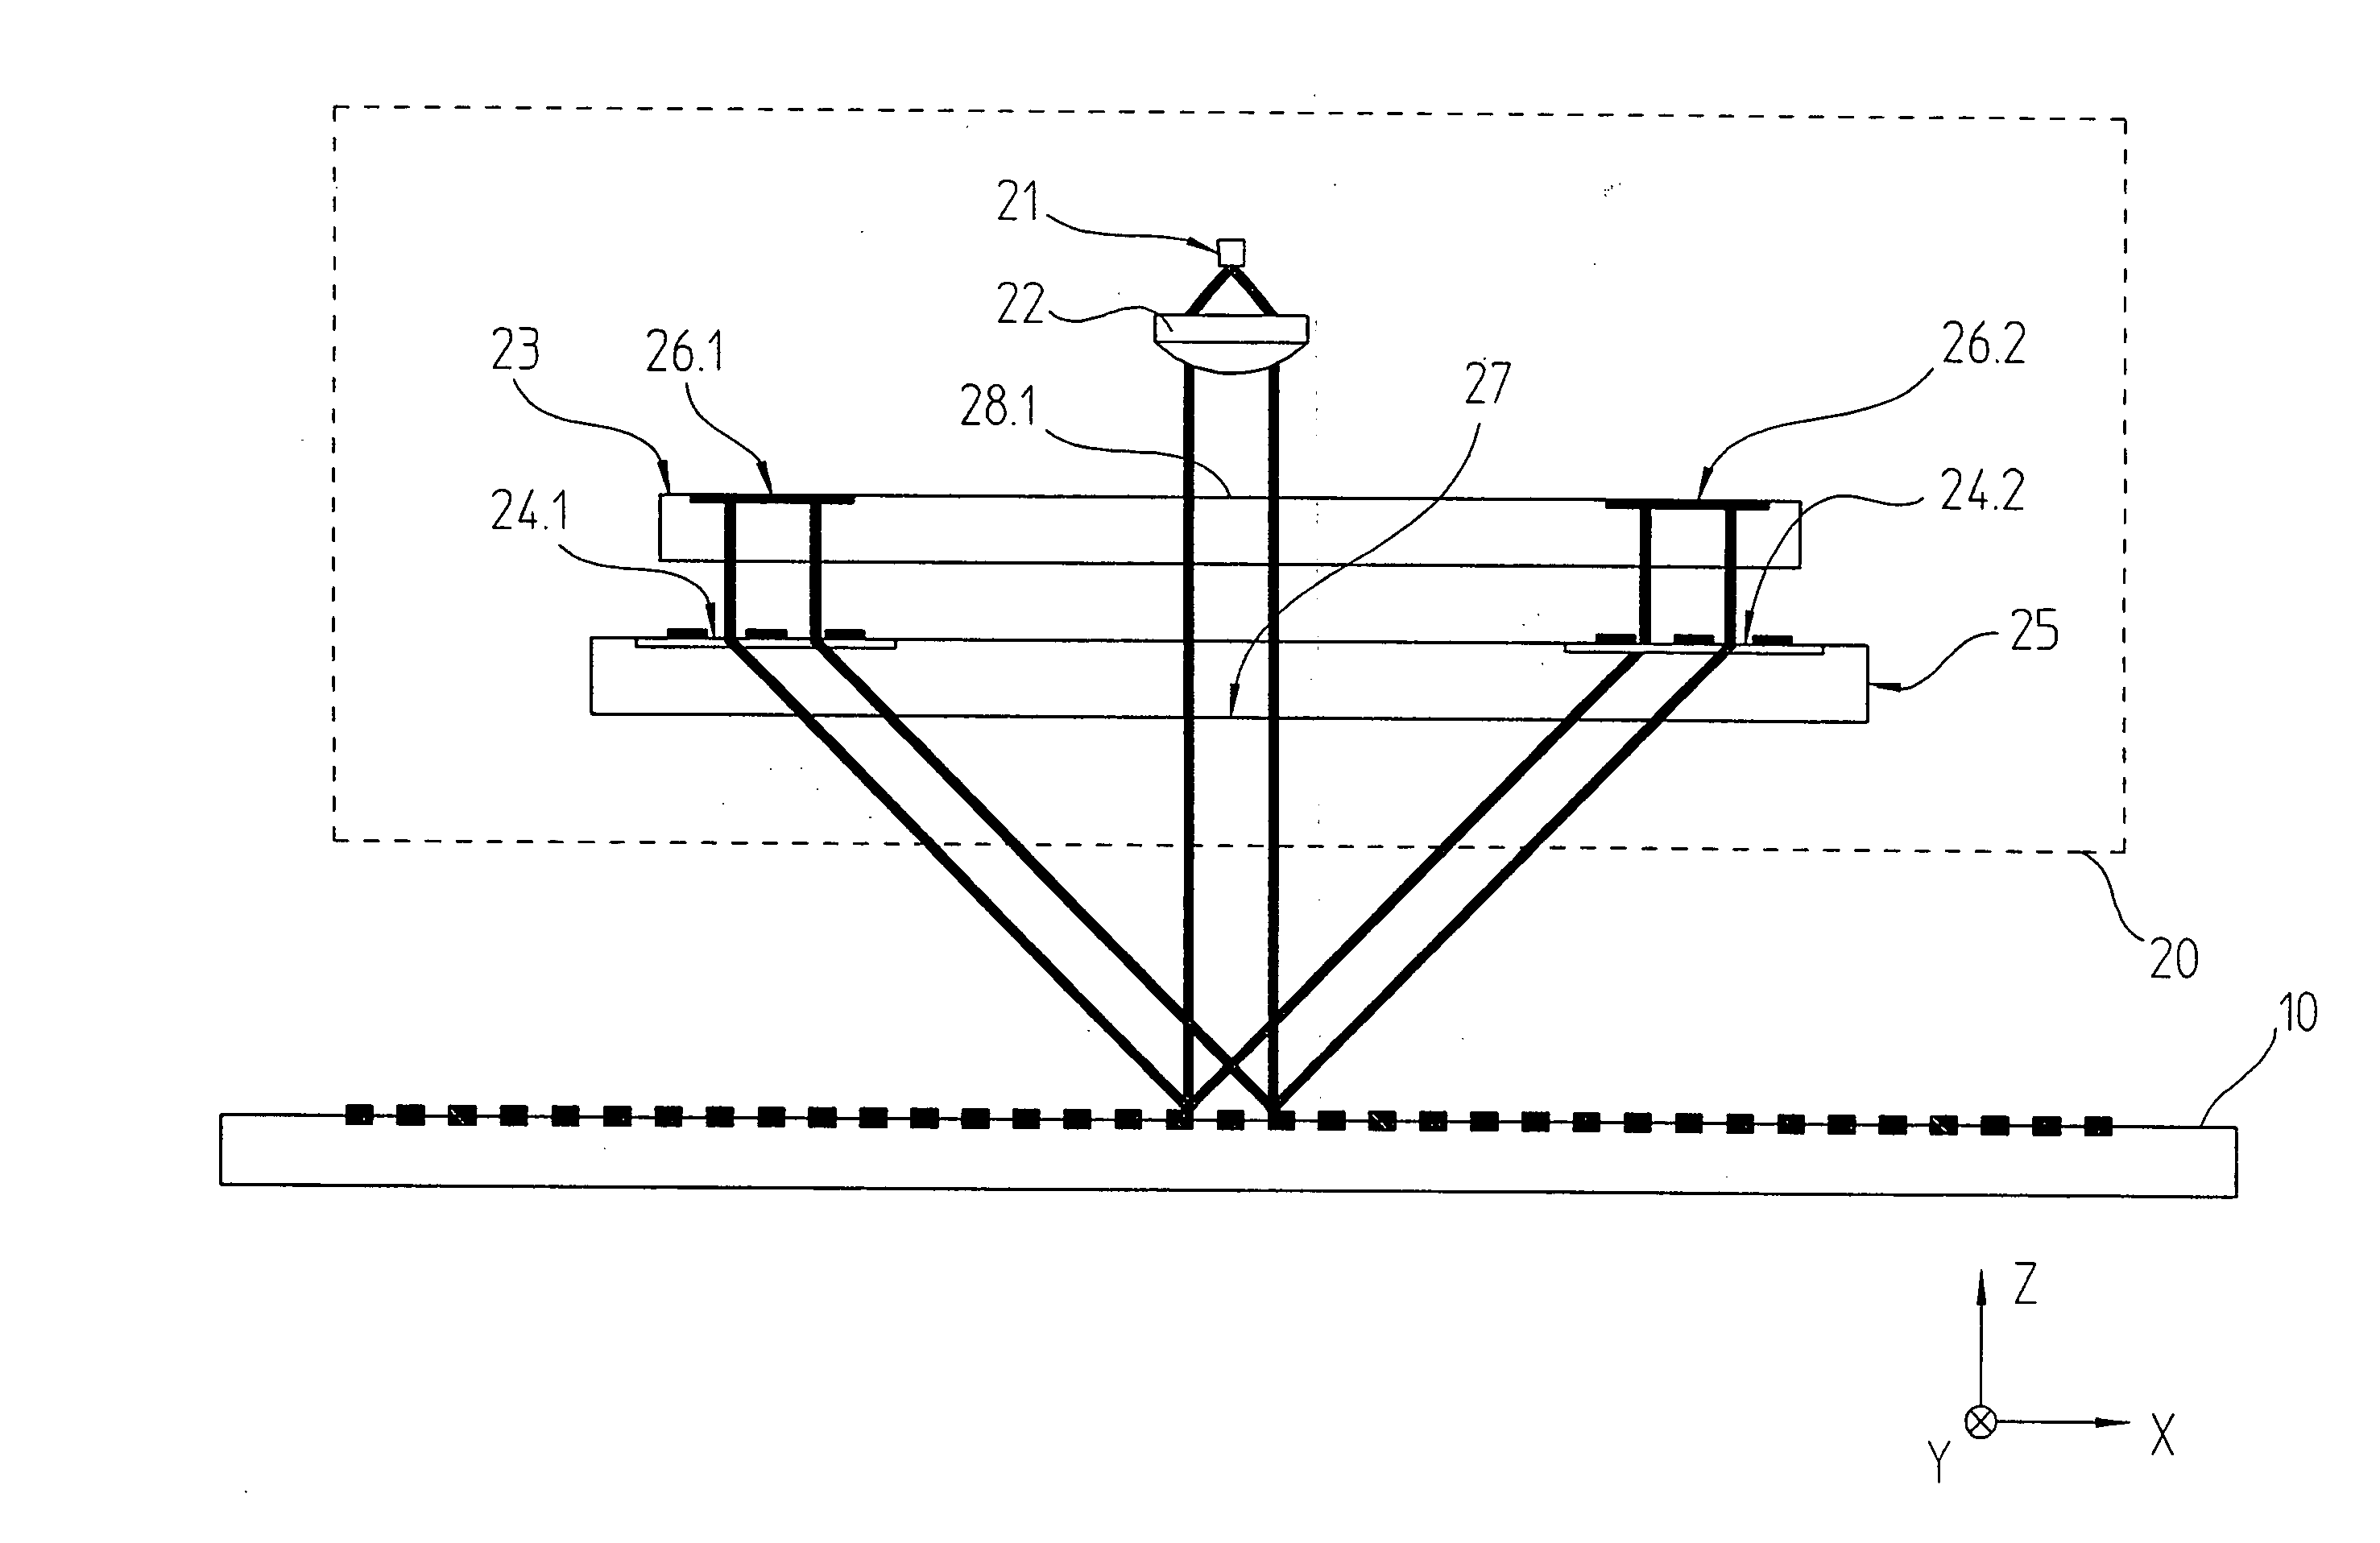 Position-measuring device